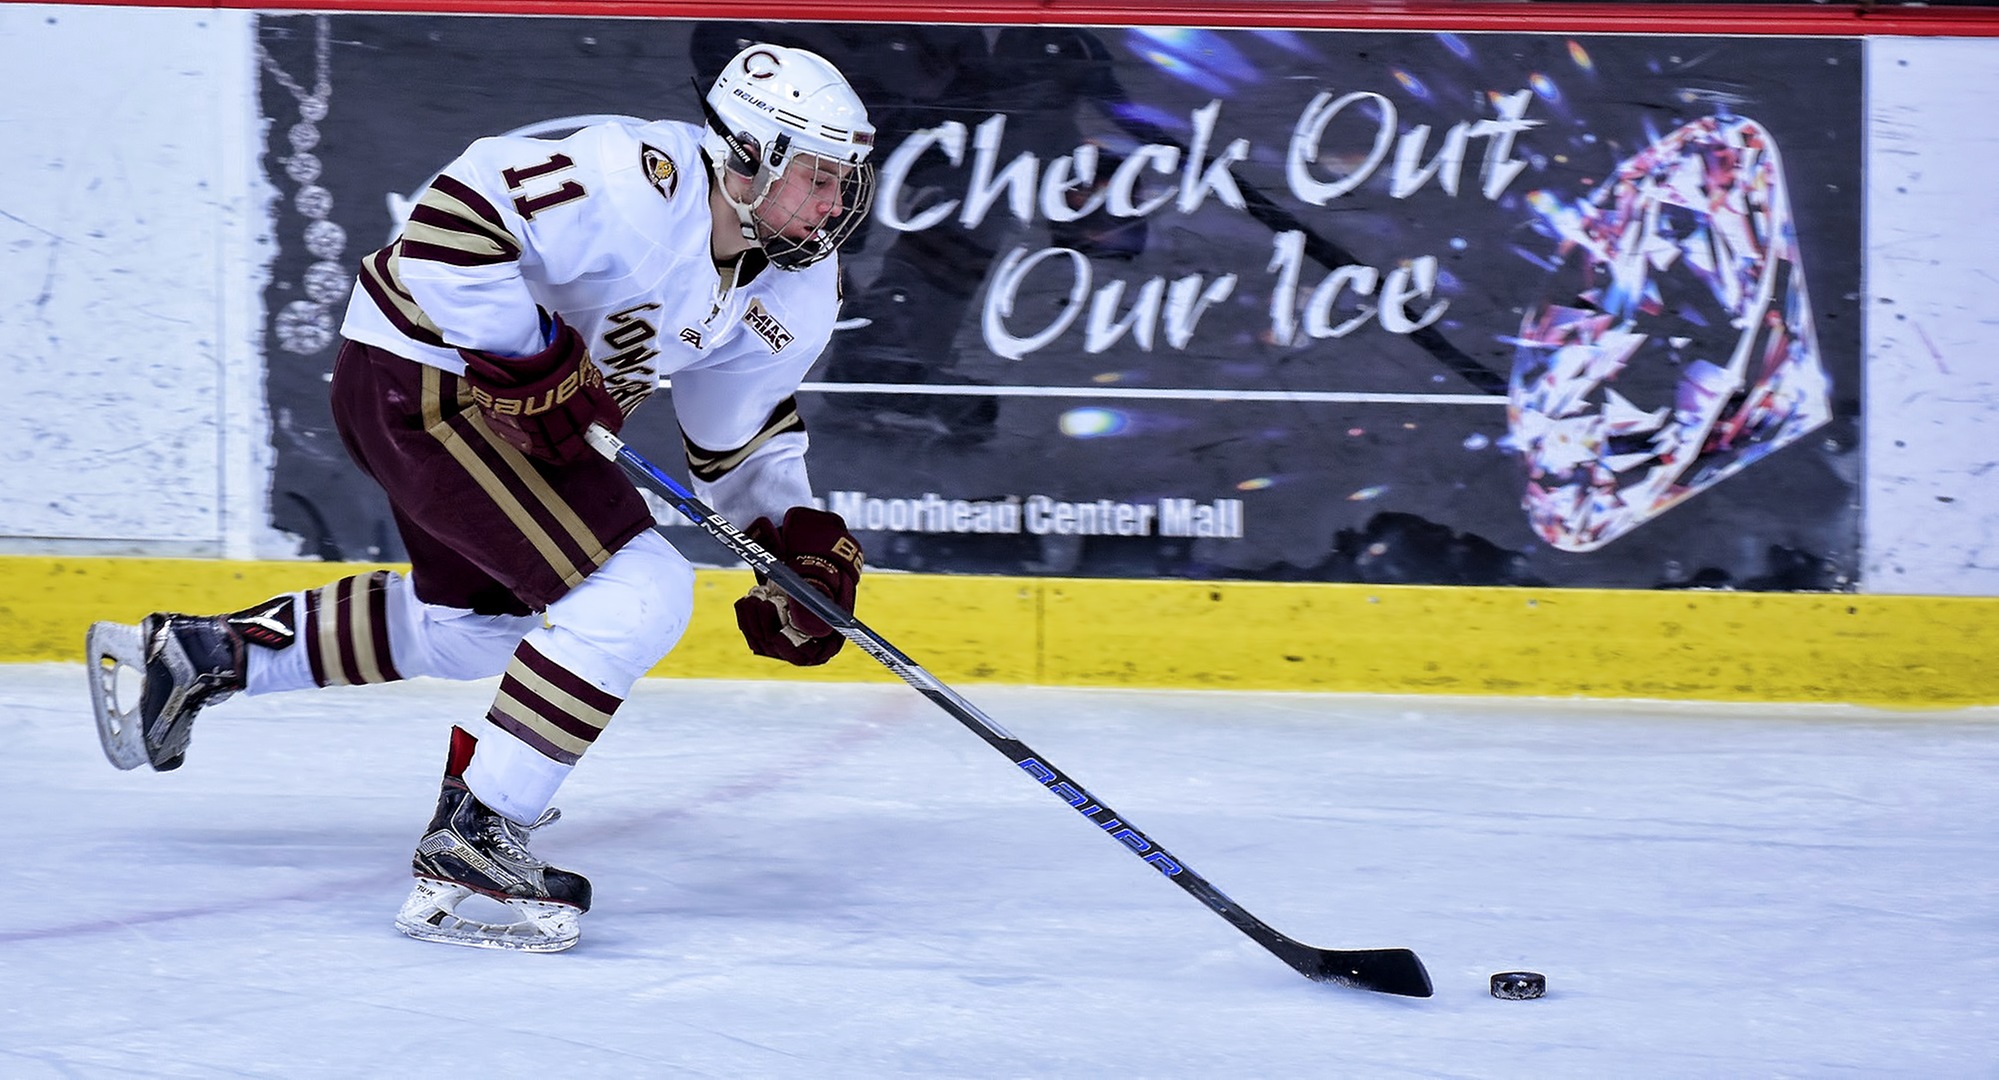 Jacen Bracko had a hat trick, including two goals in 3:26 in the second period, in the Cobbers' series-sweeping win at Hamline.